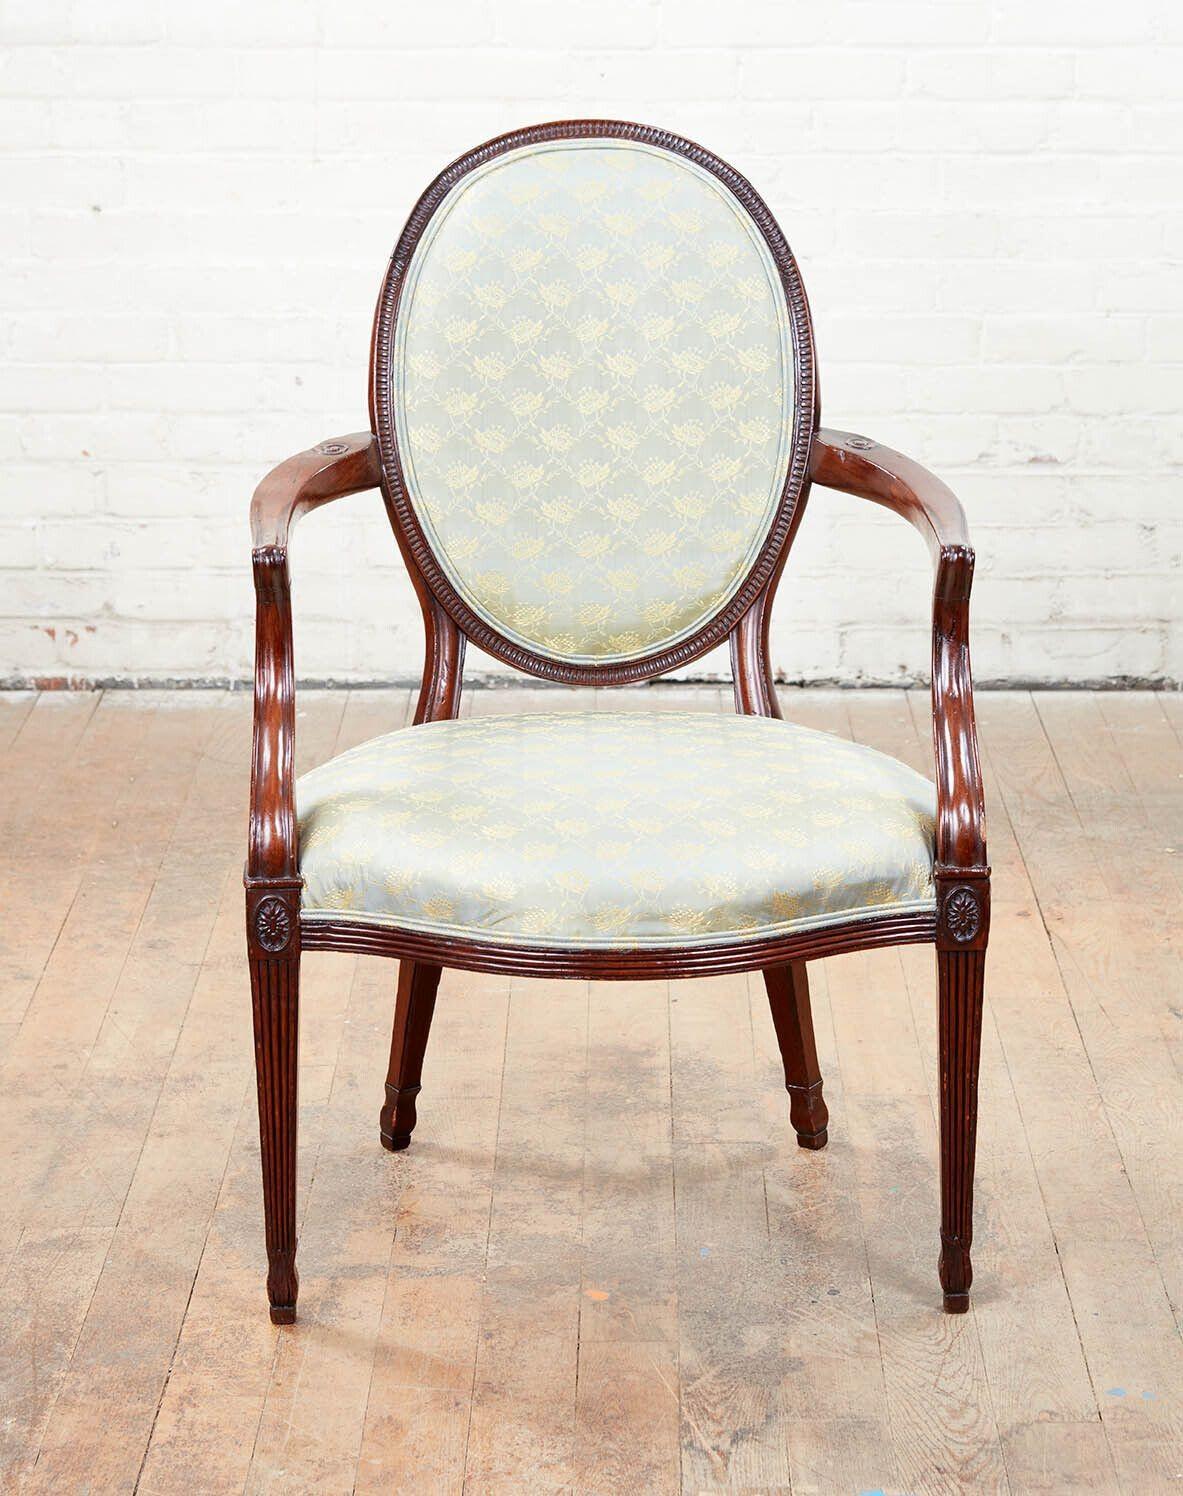 Fine pair of George III mahogany armchairs, the oval backs with fluted surrounds, the arms with scroll carved florish over shaped seats with ribbed rails, the patera carved tapered legs with fluting and long leave carved shaped feet.
 
seat height